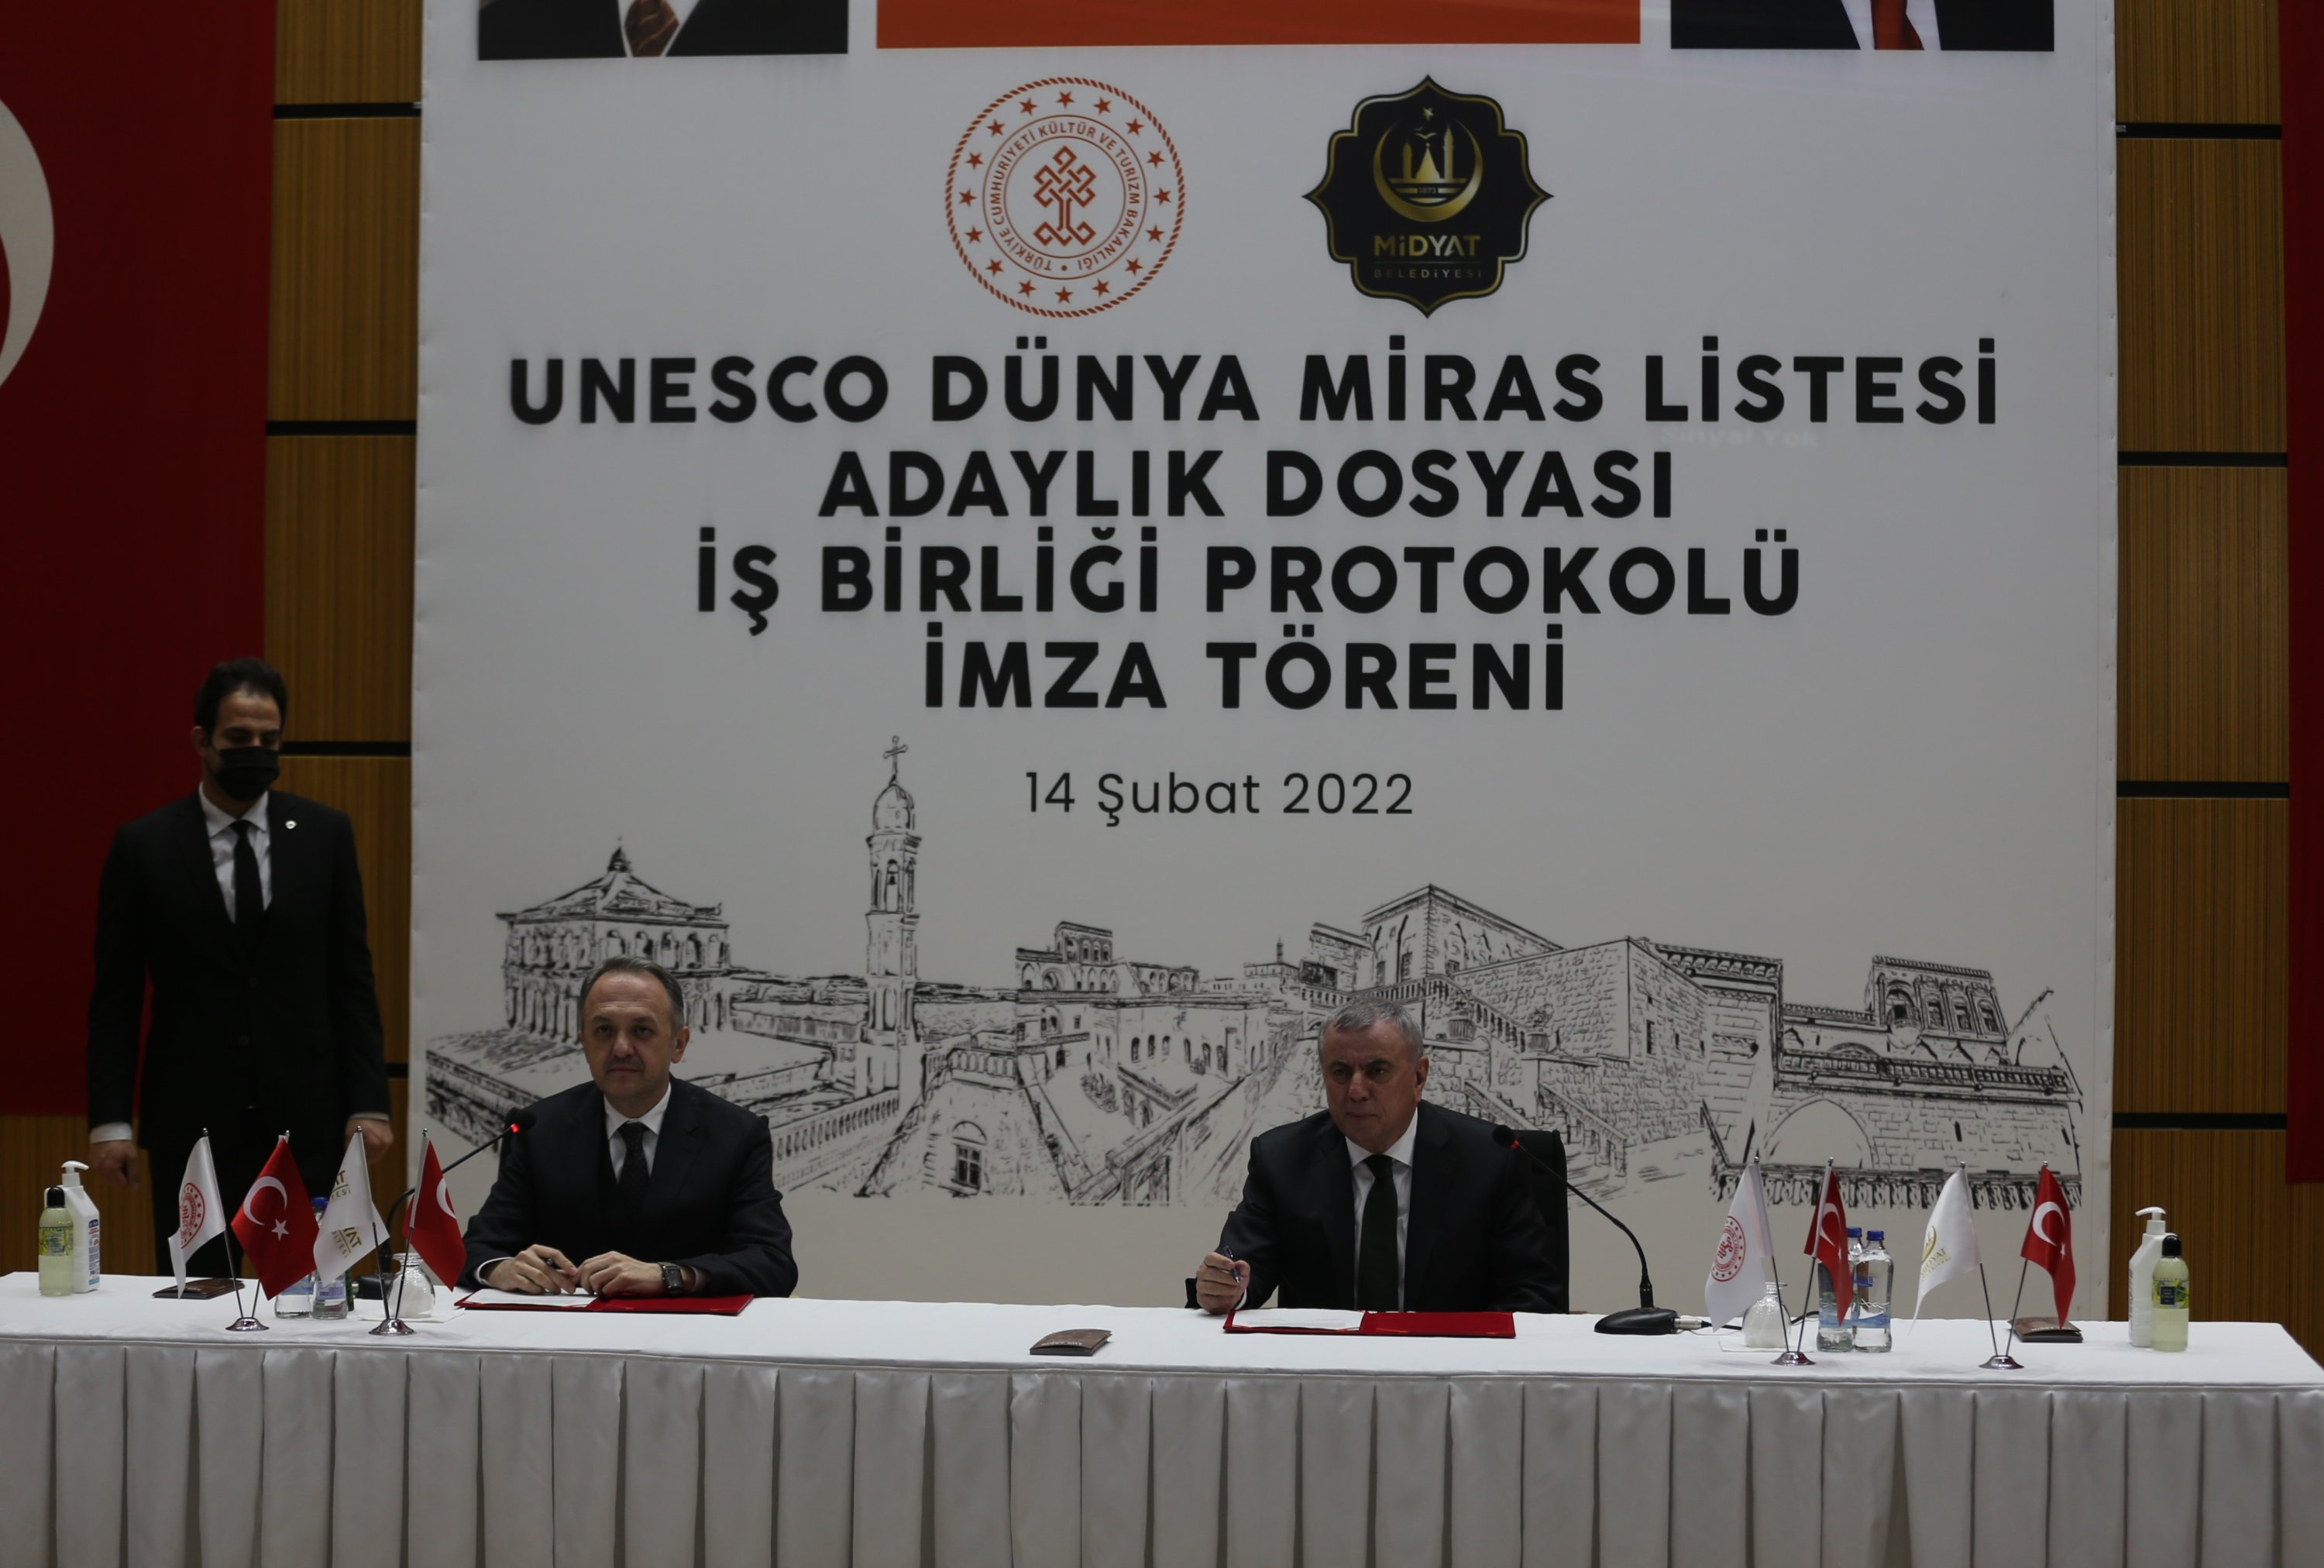 Midyat Mayor Veysi Şahin (R) and Cultural Heritage and Museums General Manager Gökhan Yazgı at the signing of the protocol, Mardin, southeastern Turkey, Feb. 14, 2022. (AA Photo)